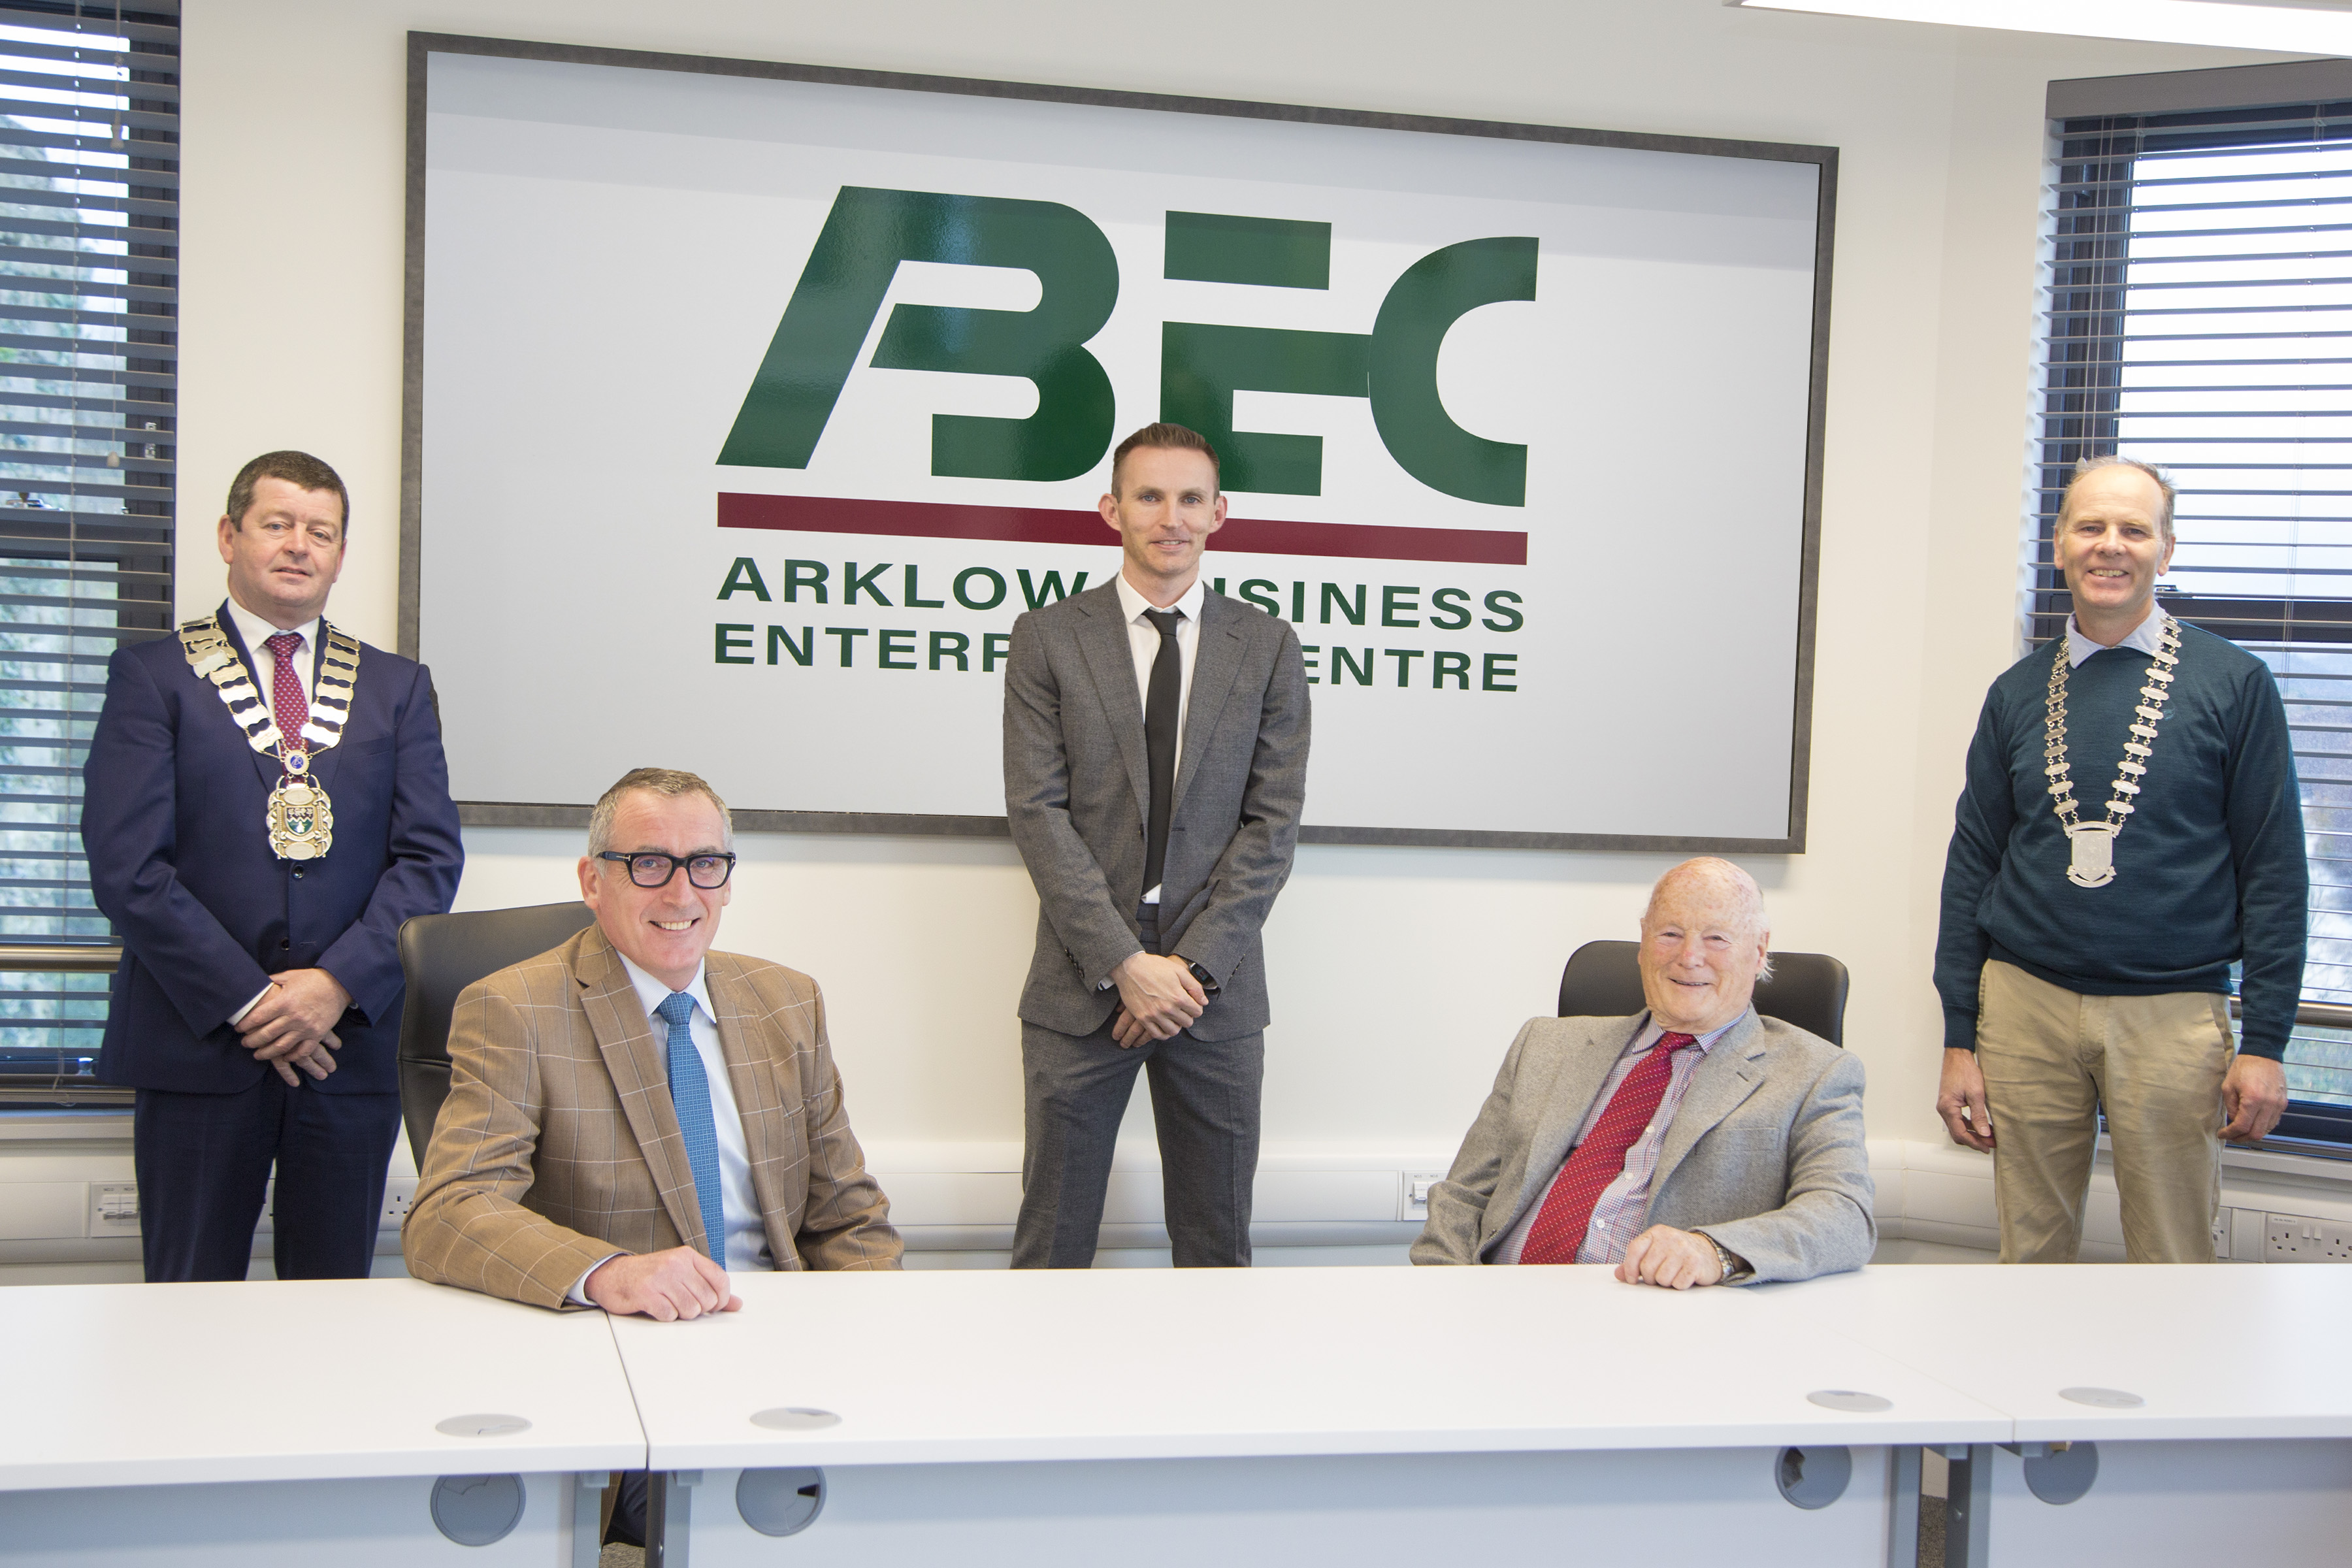 ARKLOW COURTHOUSE – BACK IN BUSINESS